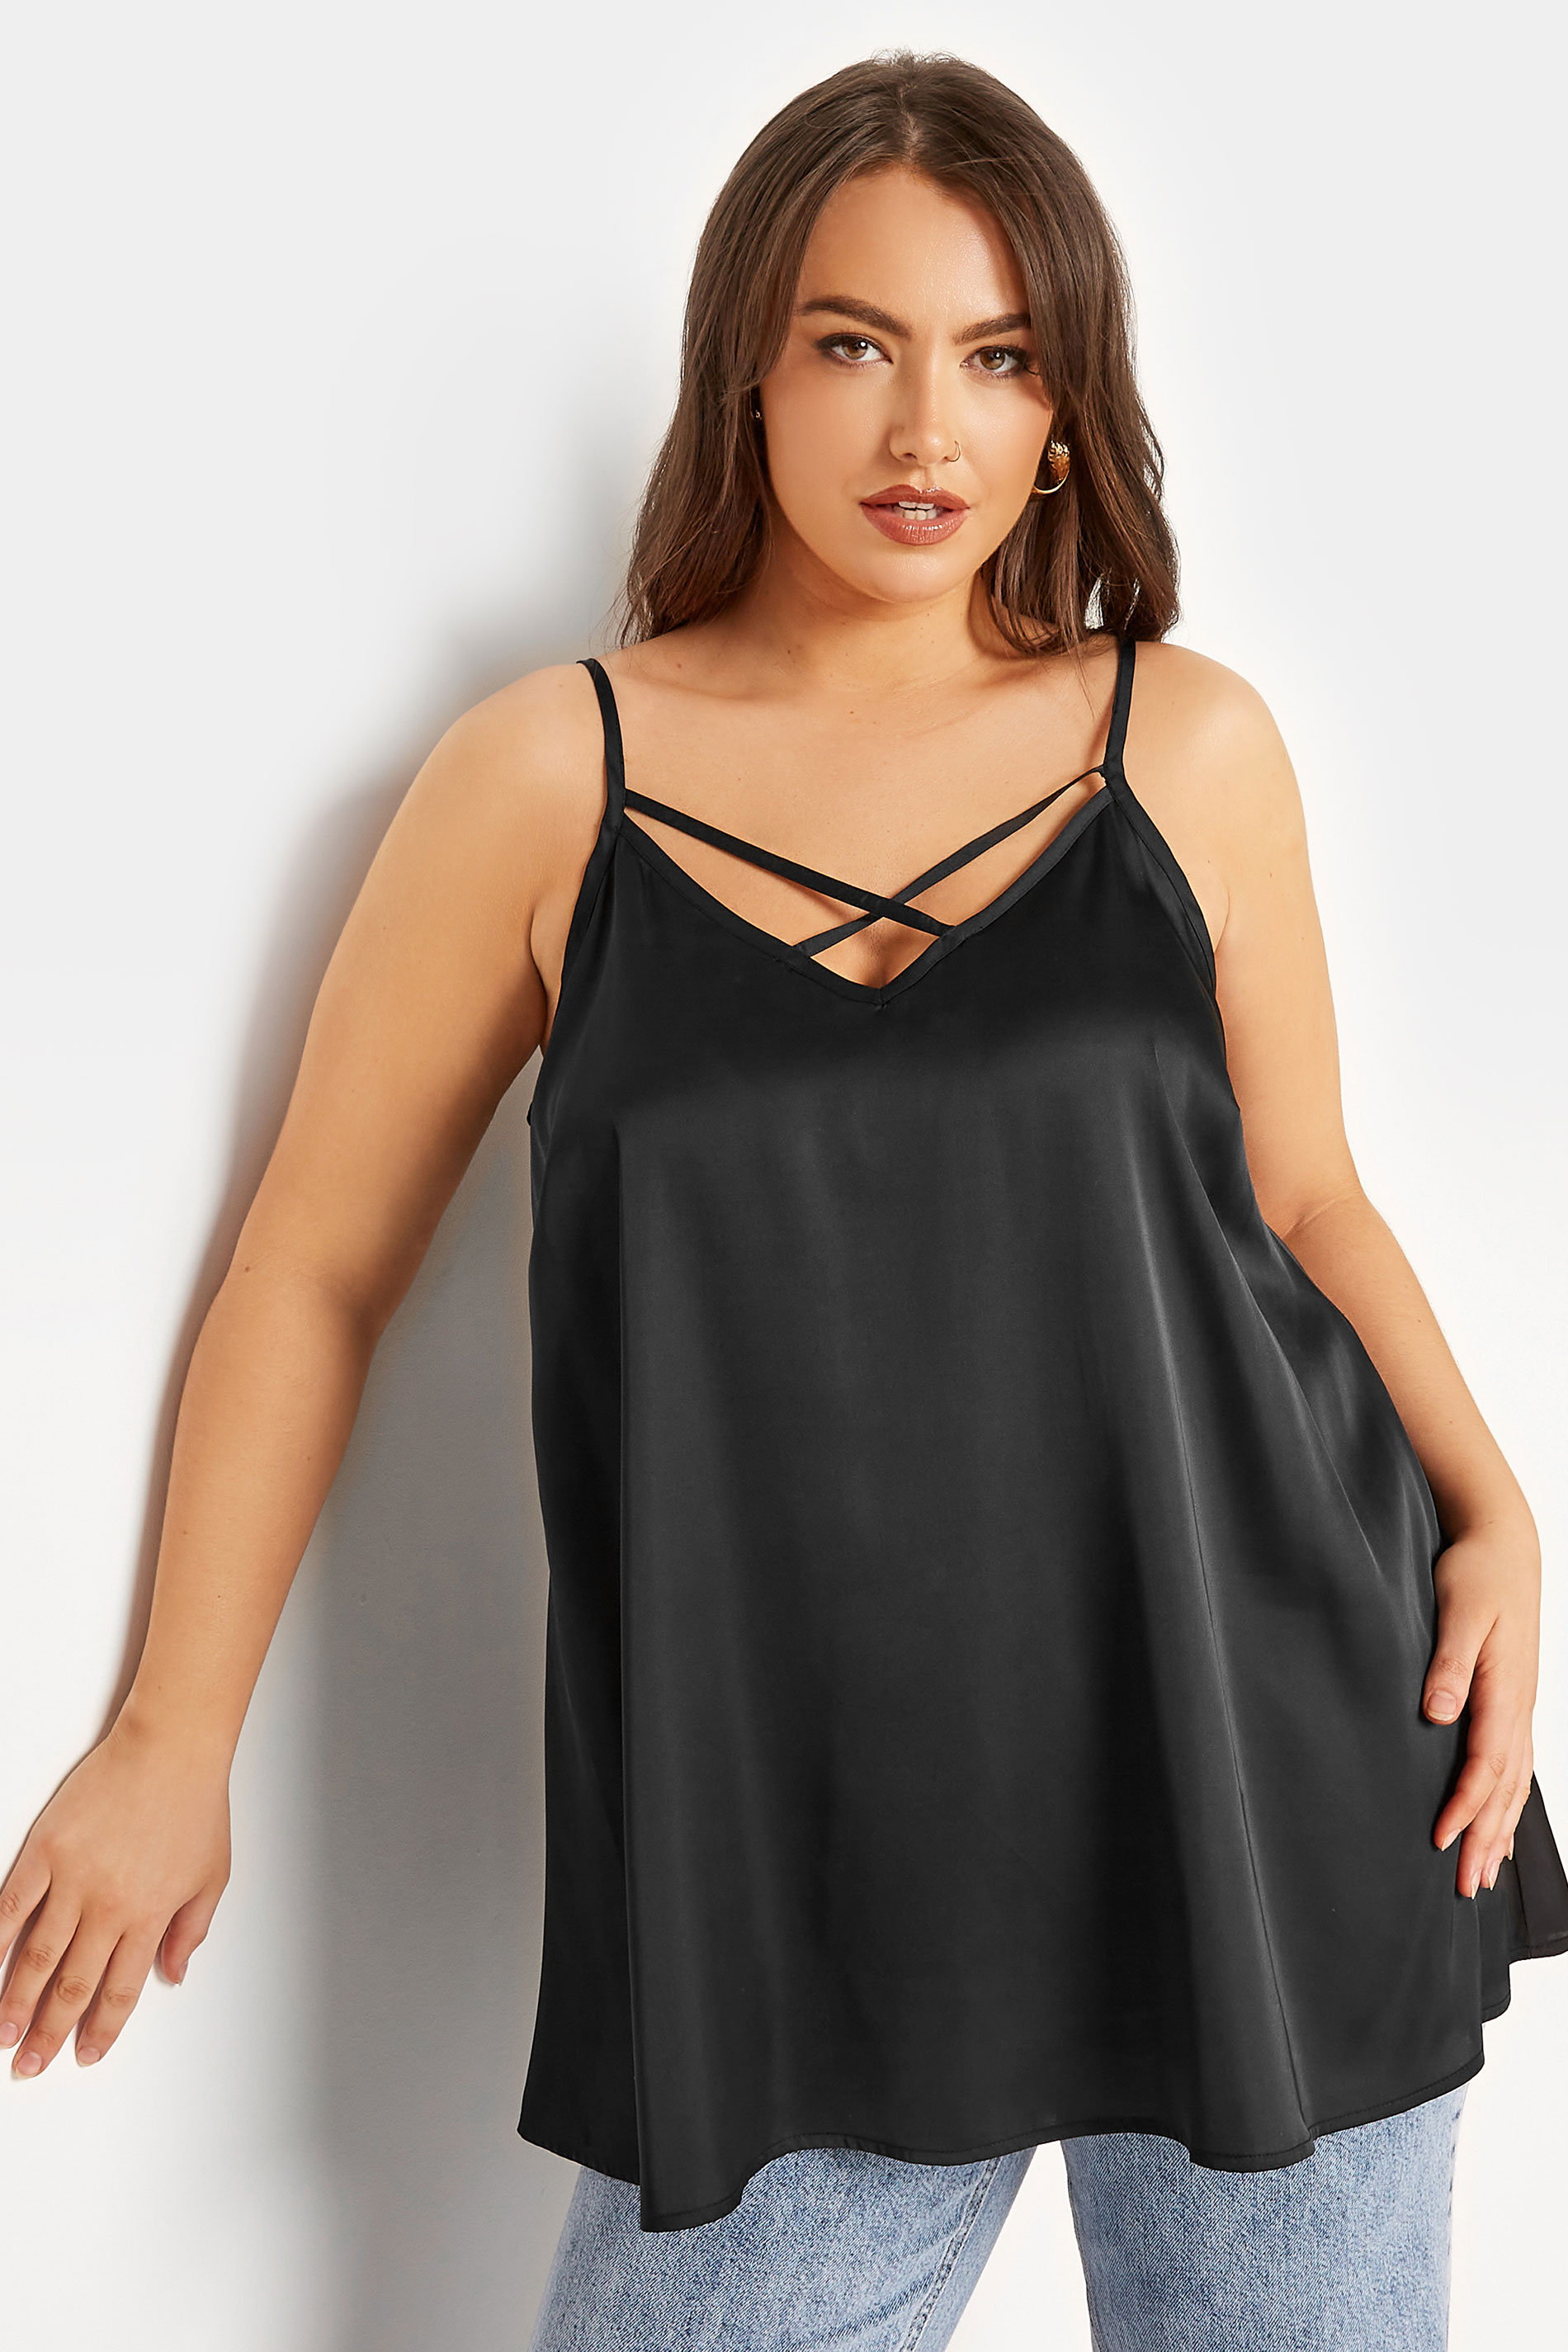 LIMITED COLLECTION Curve Black Satin Cami Top_A.jpg